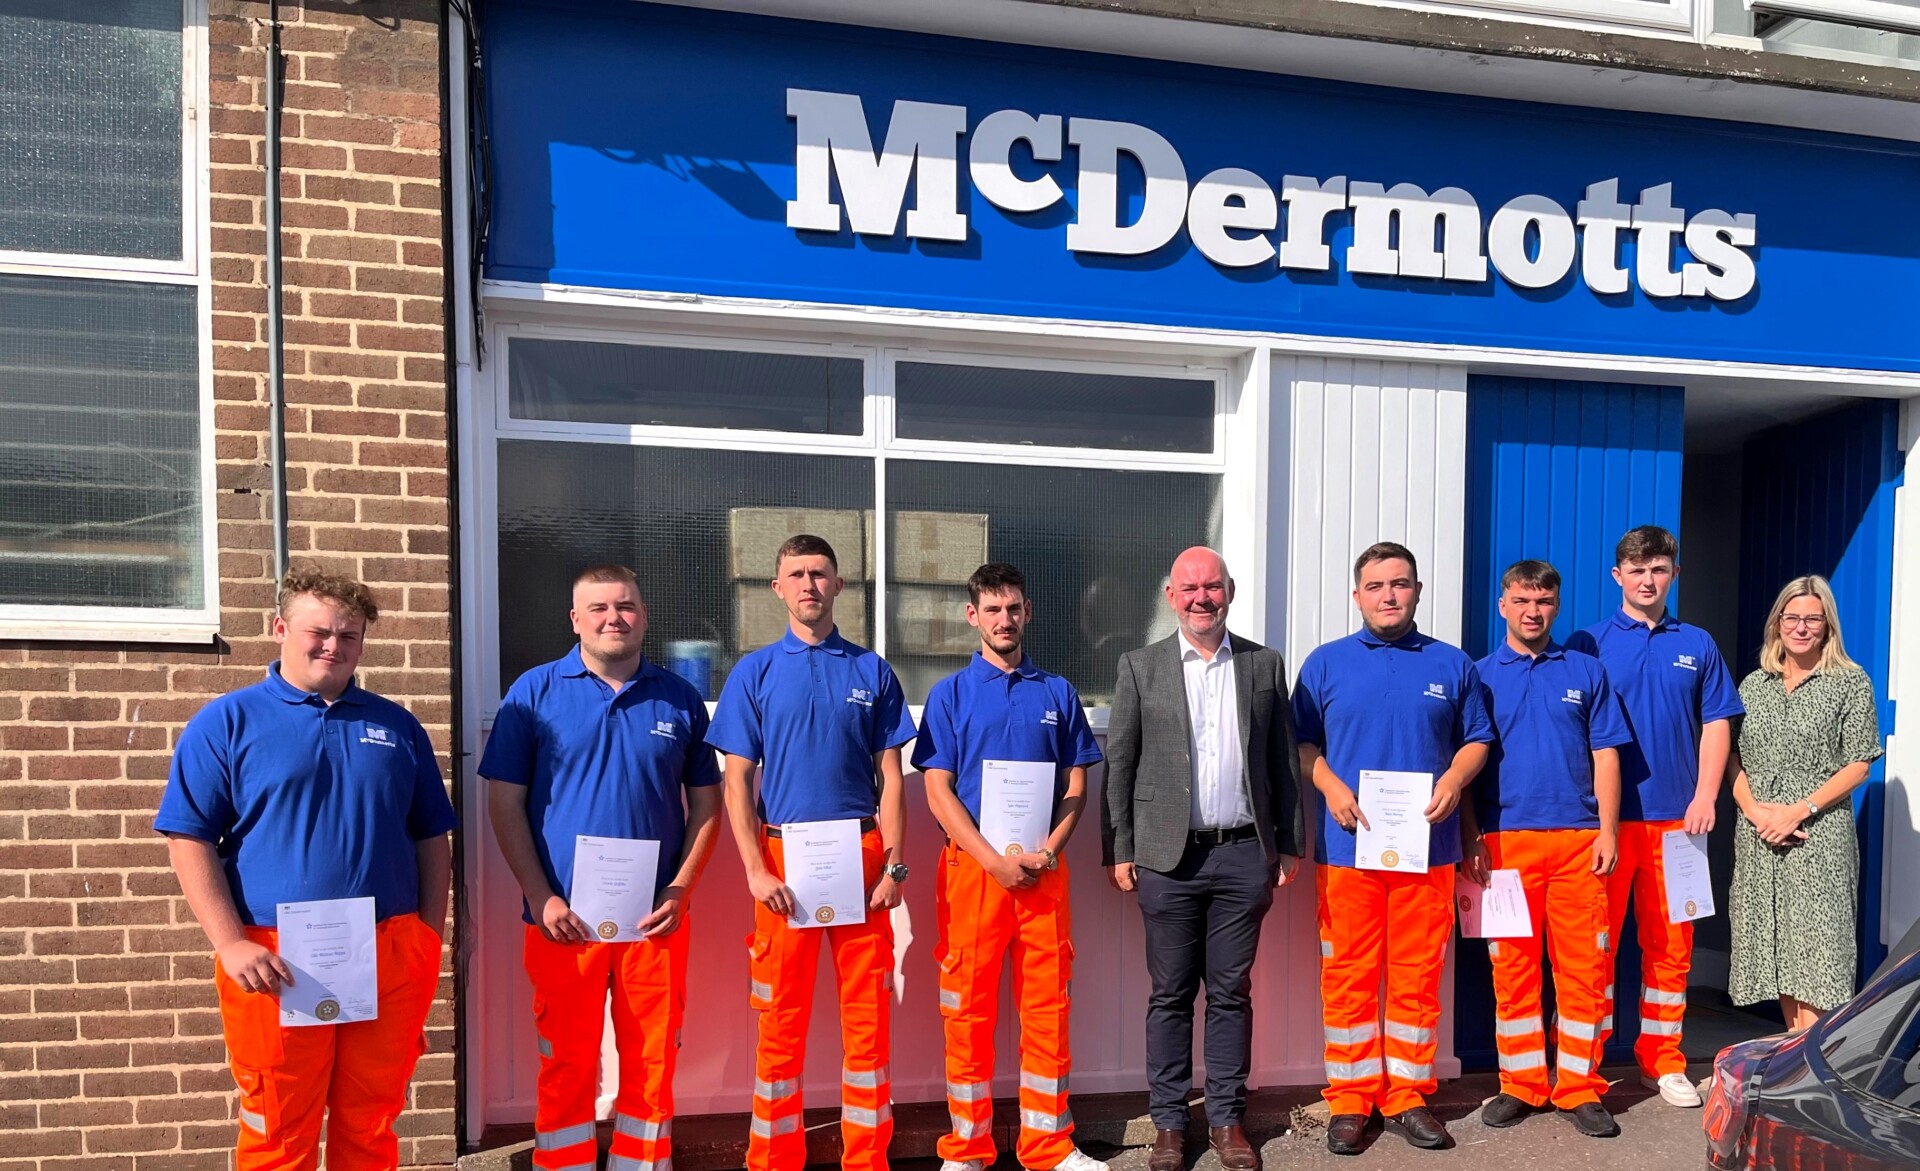 Congratulations to all seven of the McDermotts apprentices who have passed their Level 2 Groundworker apprenticeships.